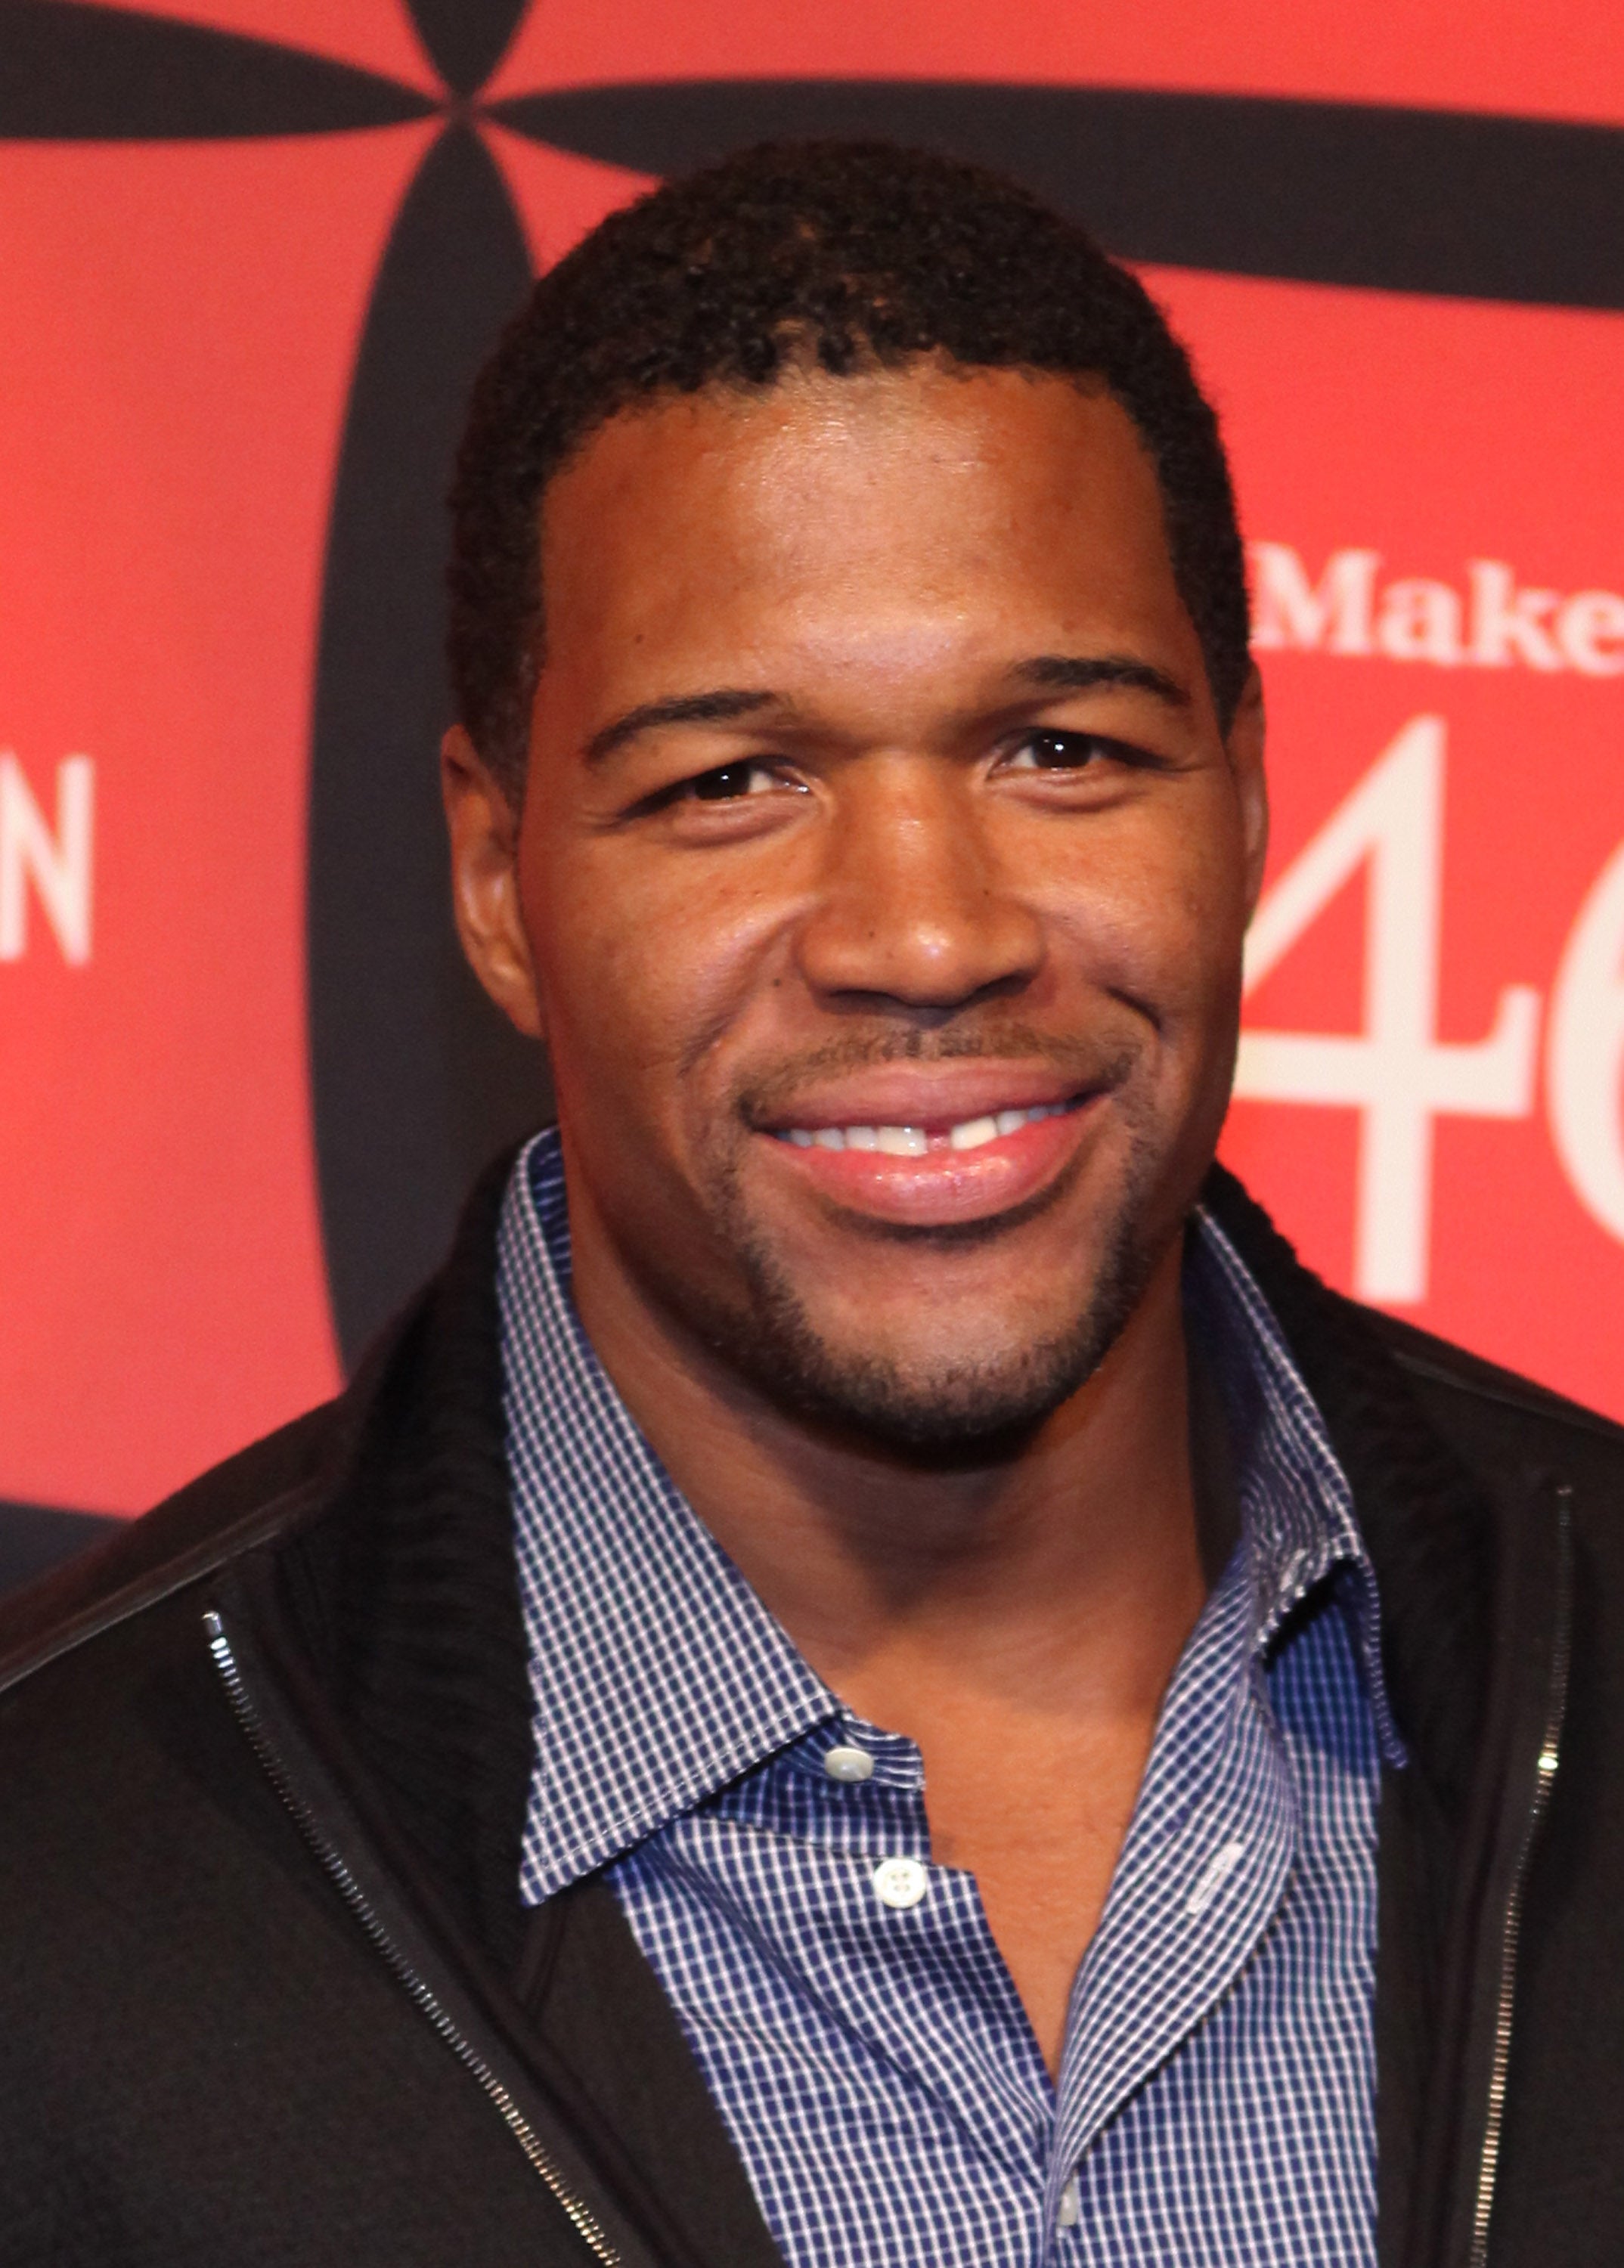 Michael Strahan Reportedly Named New 'Live!' Co-Host